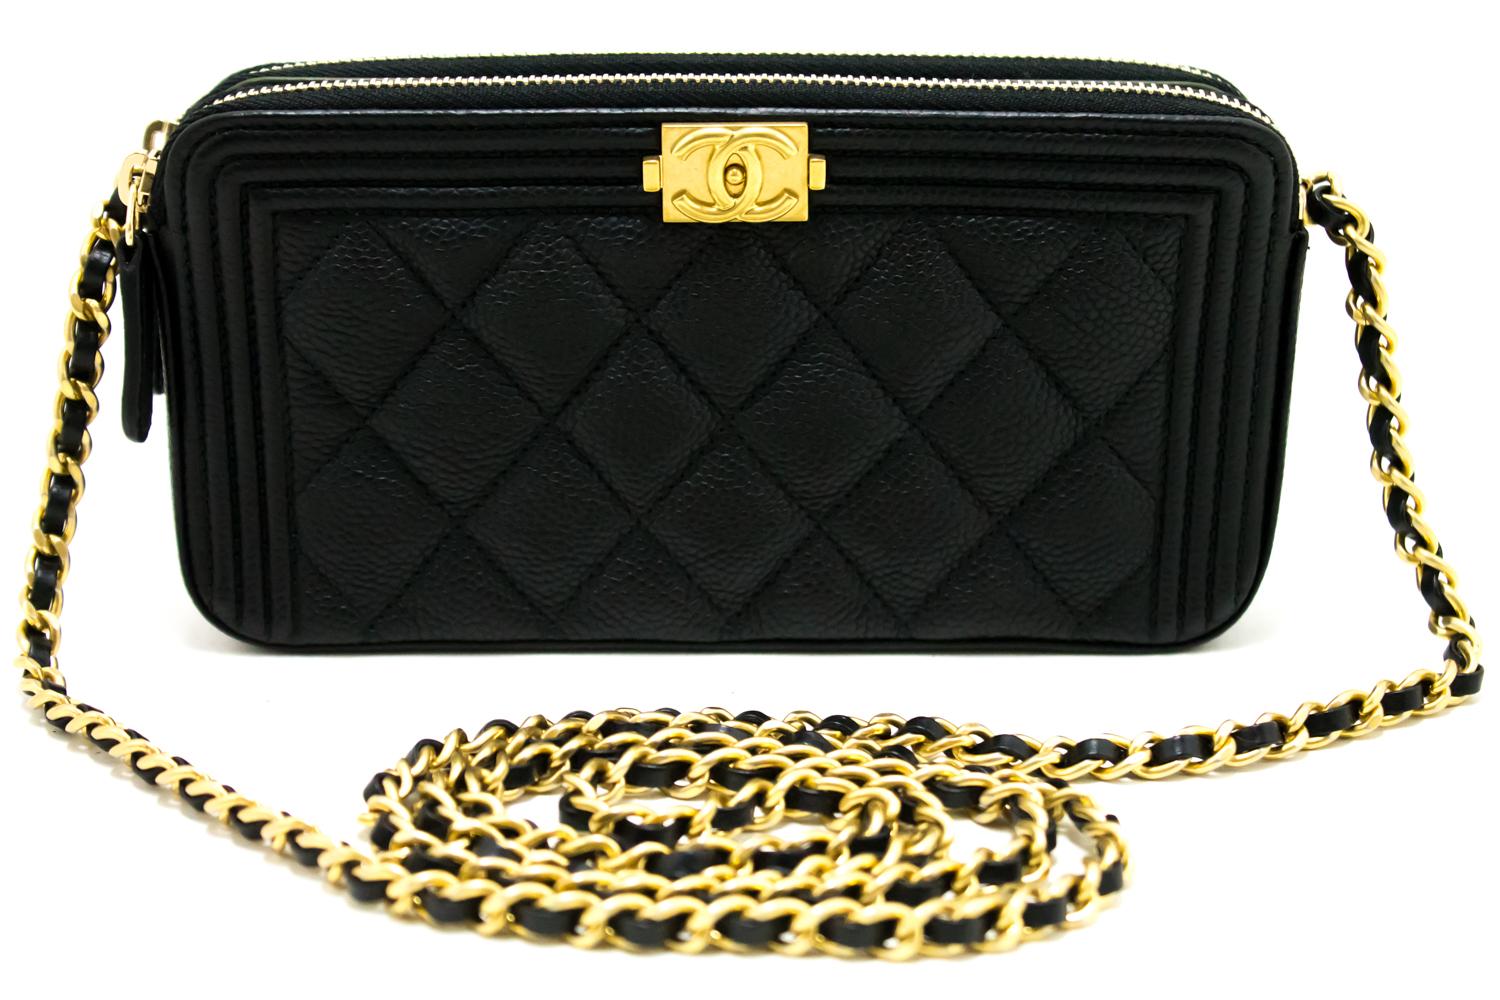 An authentic MINT! CHANEL Boy Black Caviar Wallet On Chain WOC Zip Shoulder Bag. The color is Black. The outside material is Leather. The pattern is Solid.
Conditions & Ratings
Outside material: Caviar leather
Color: Black
Closure: Zipper
Hardware